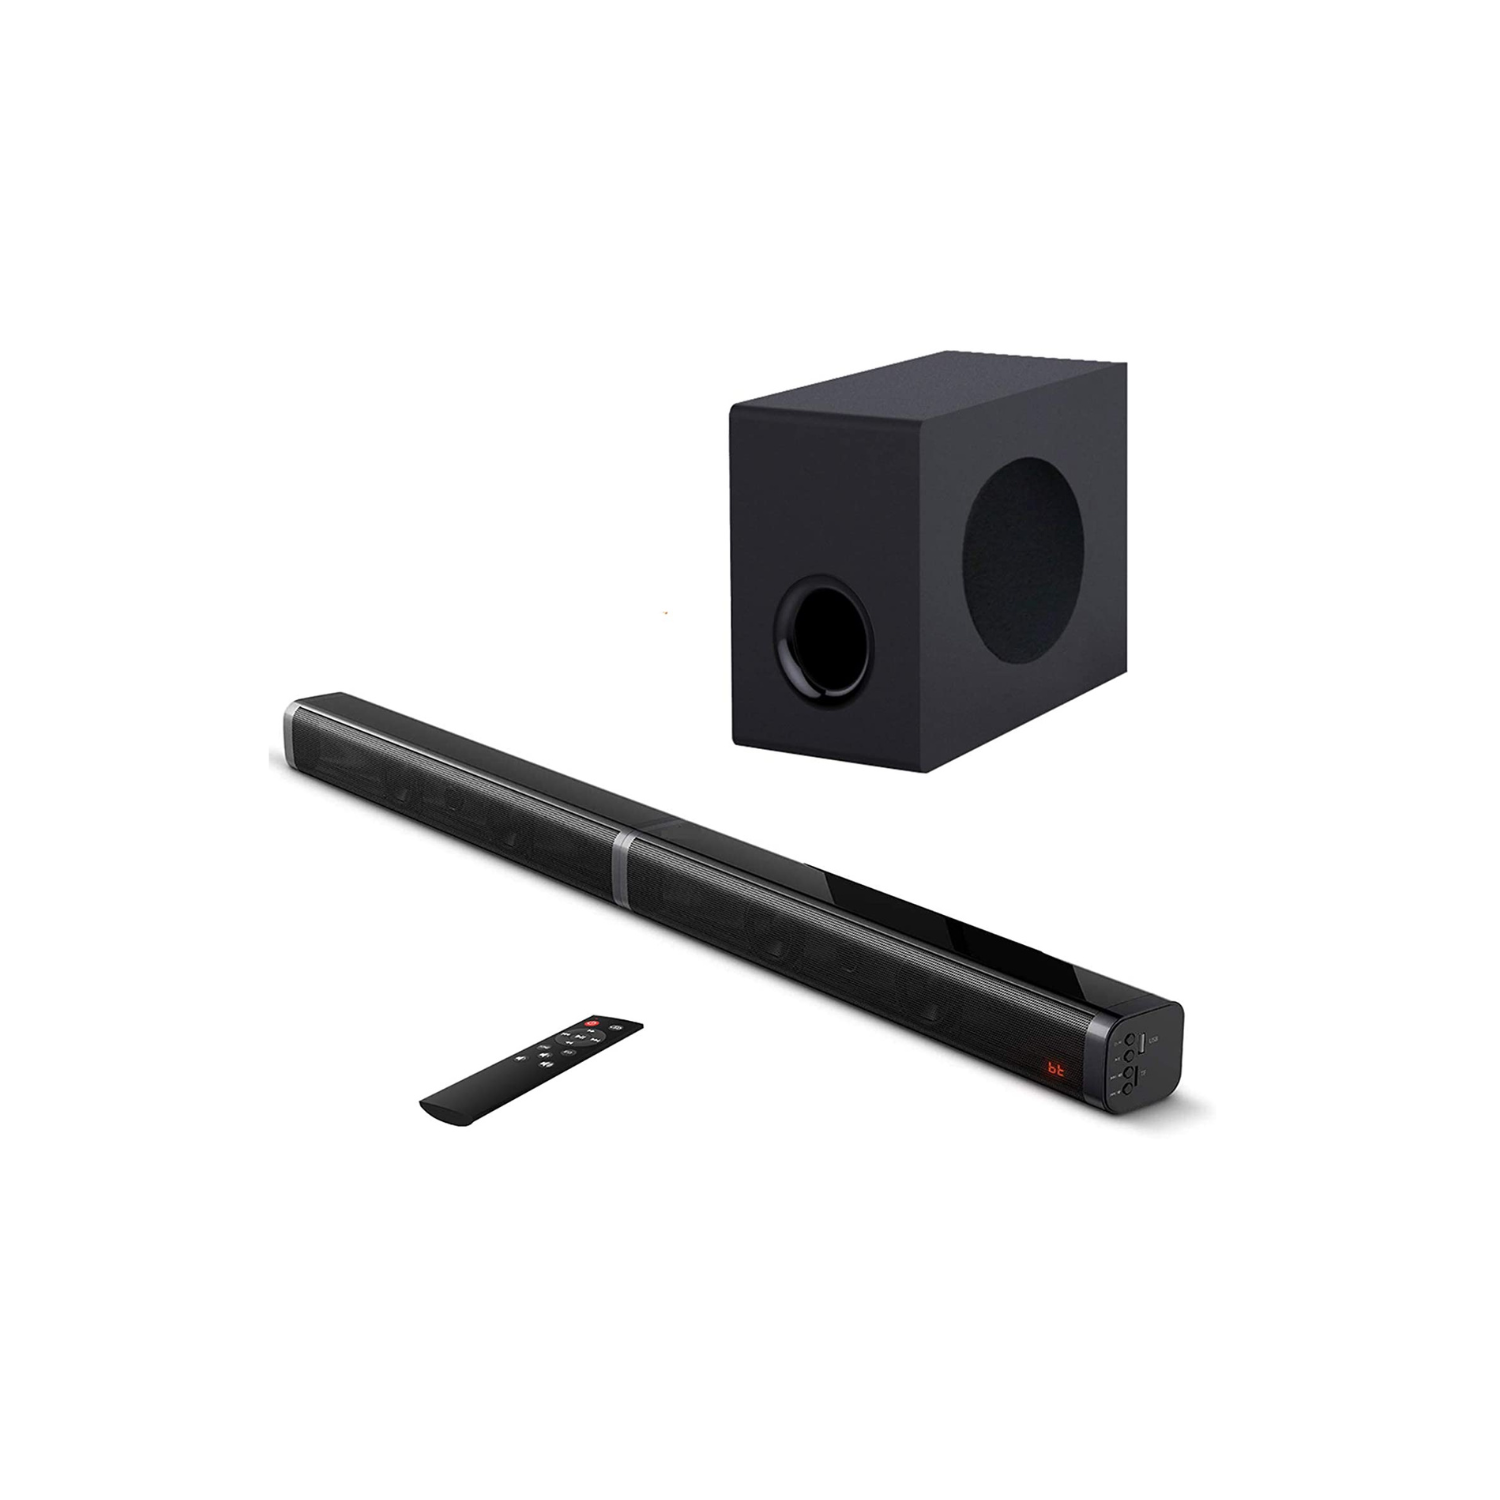 RCA RTS7116S 37″ Sound Bar with Wired Subwoofer and Bluetooth Connectivity